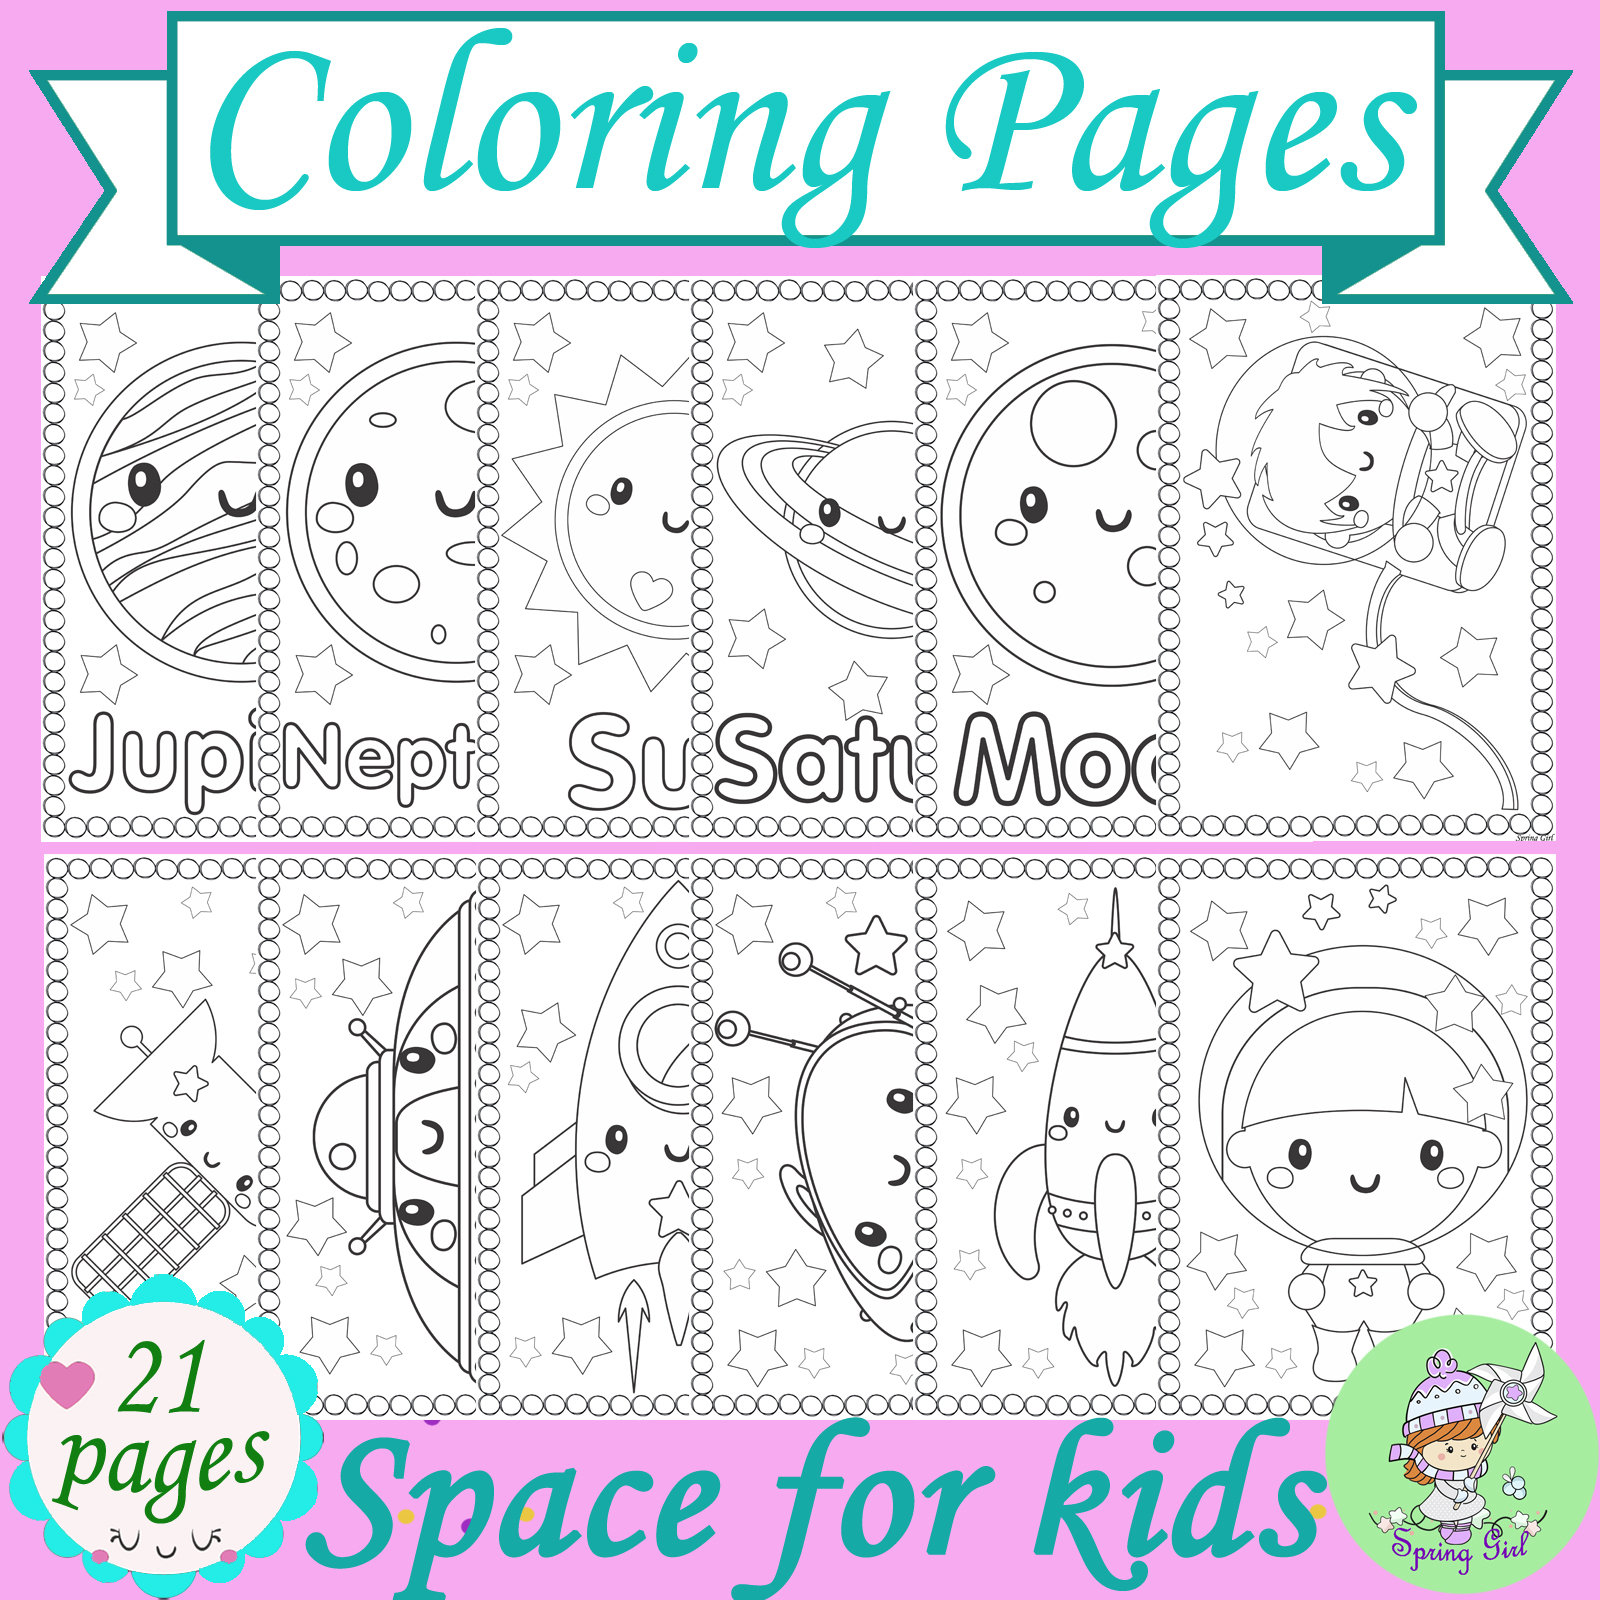 Space Planets Coloring Pages Printable for Kids   Astronomy Outer Space  Solar System Coloring Book   Space Activity Sheets INSTANT DOWNLOAD